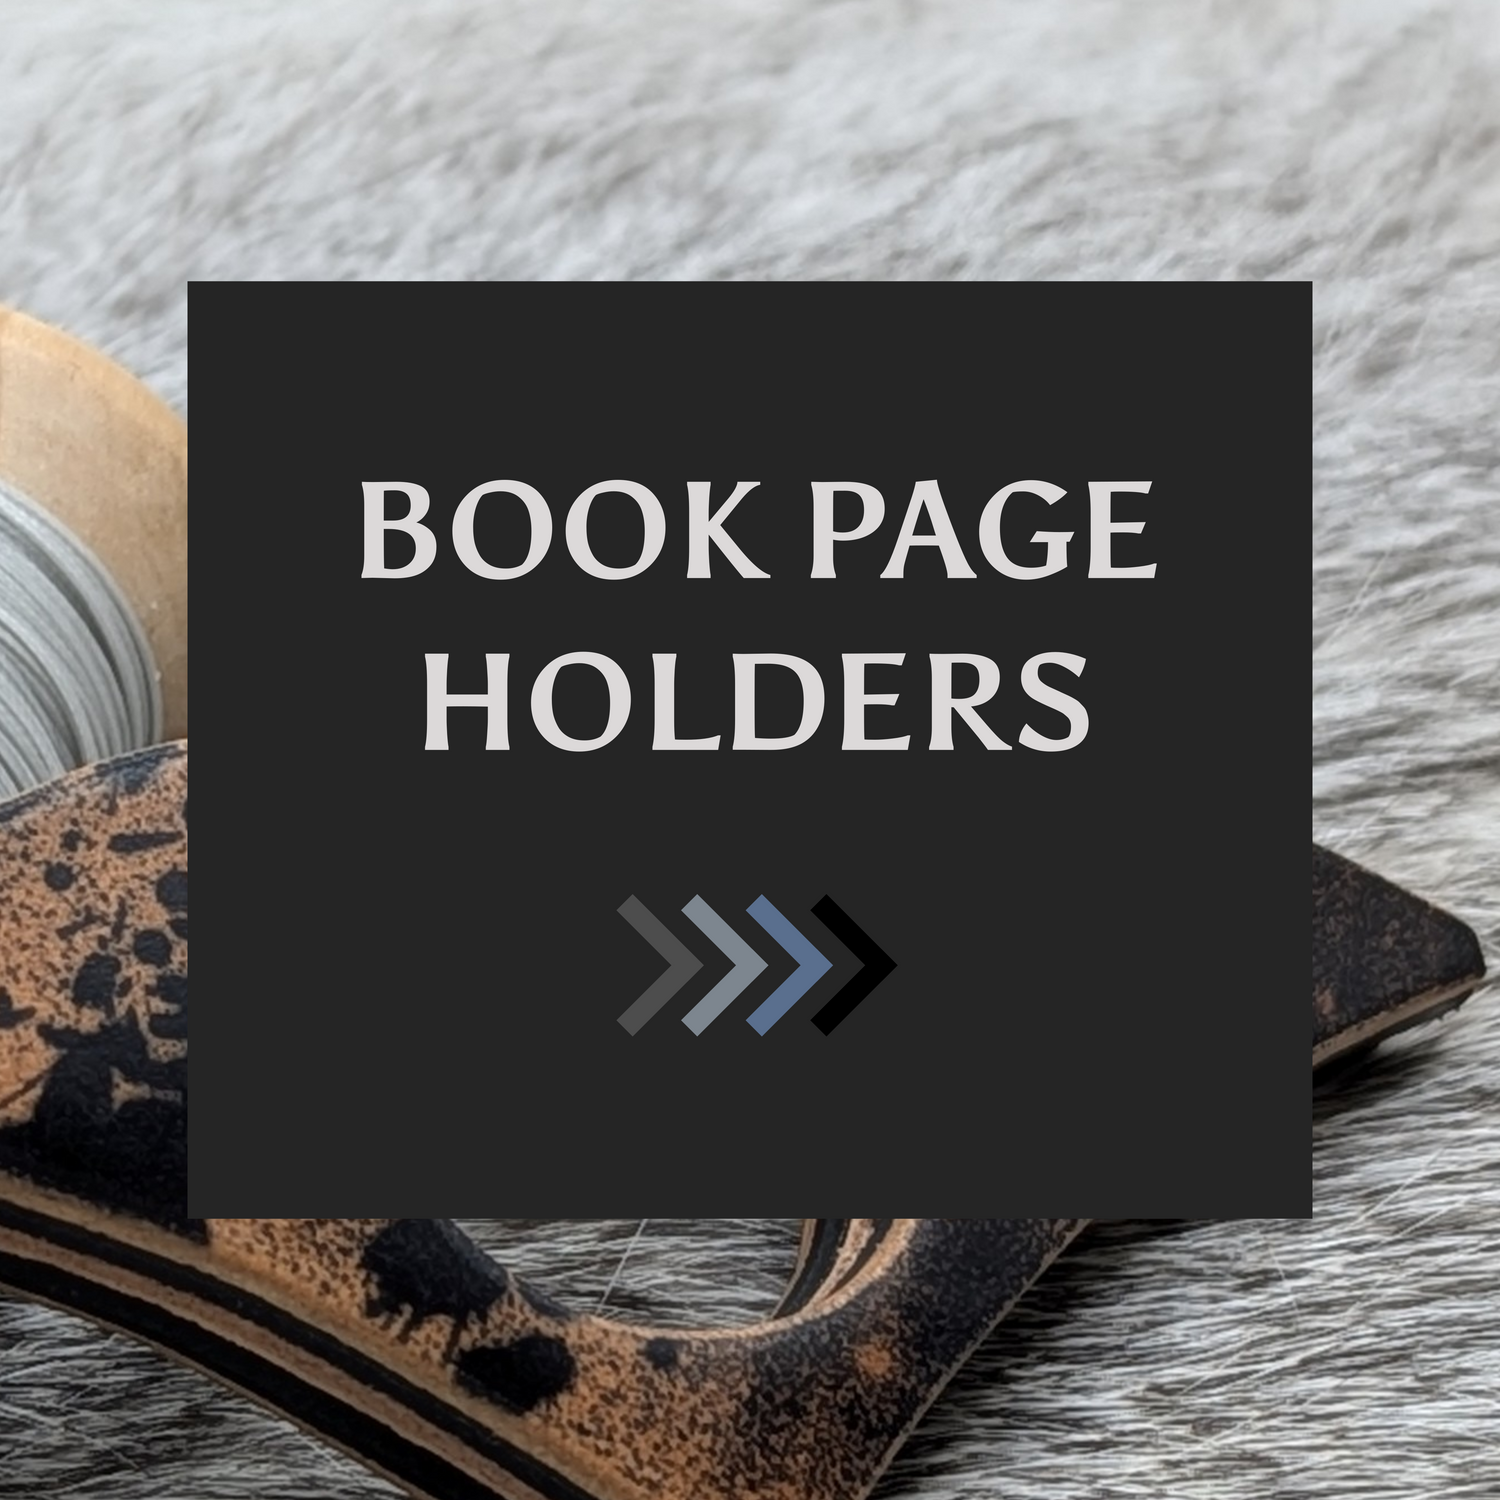 BOOK PAGE HOLDERS